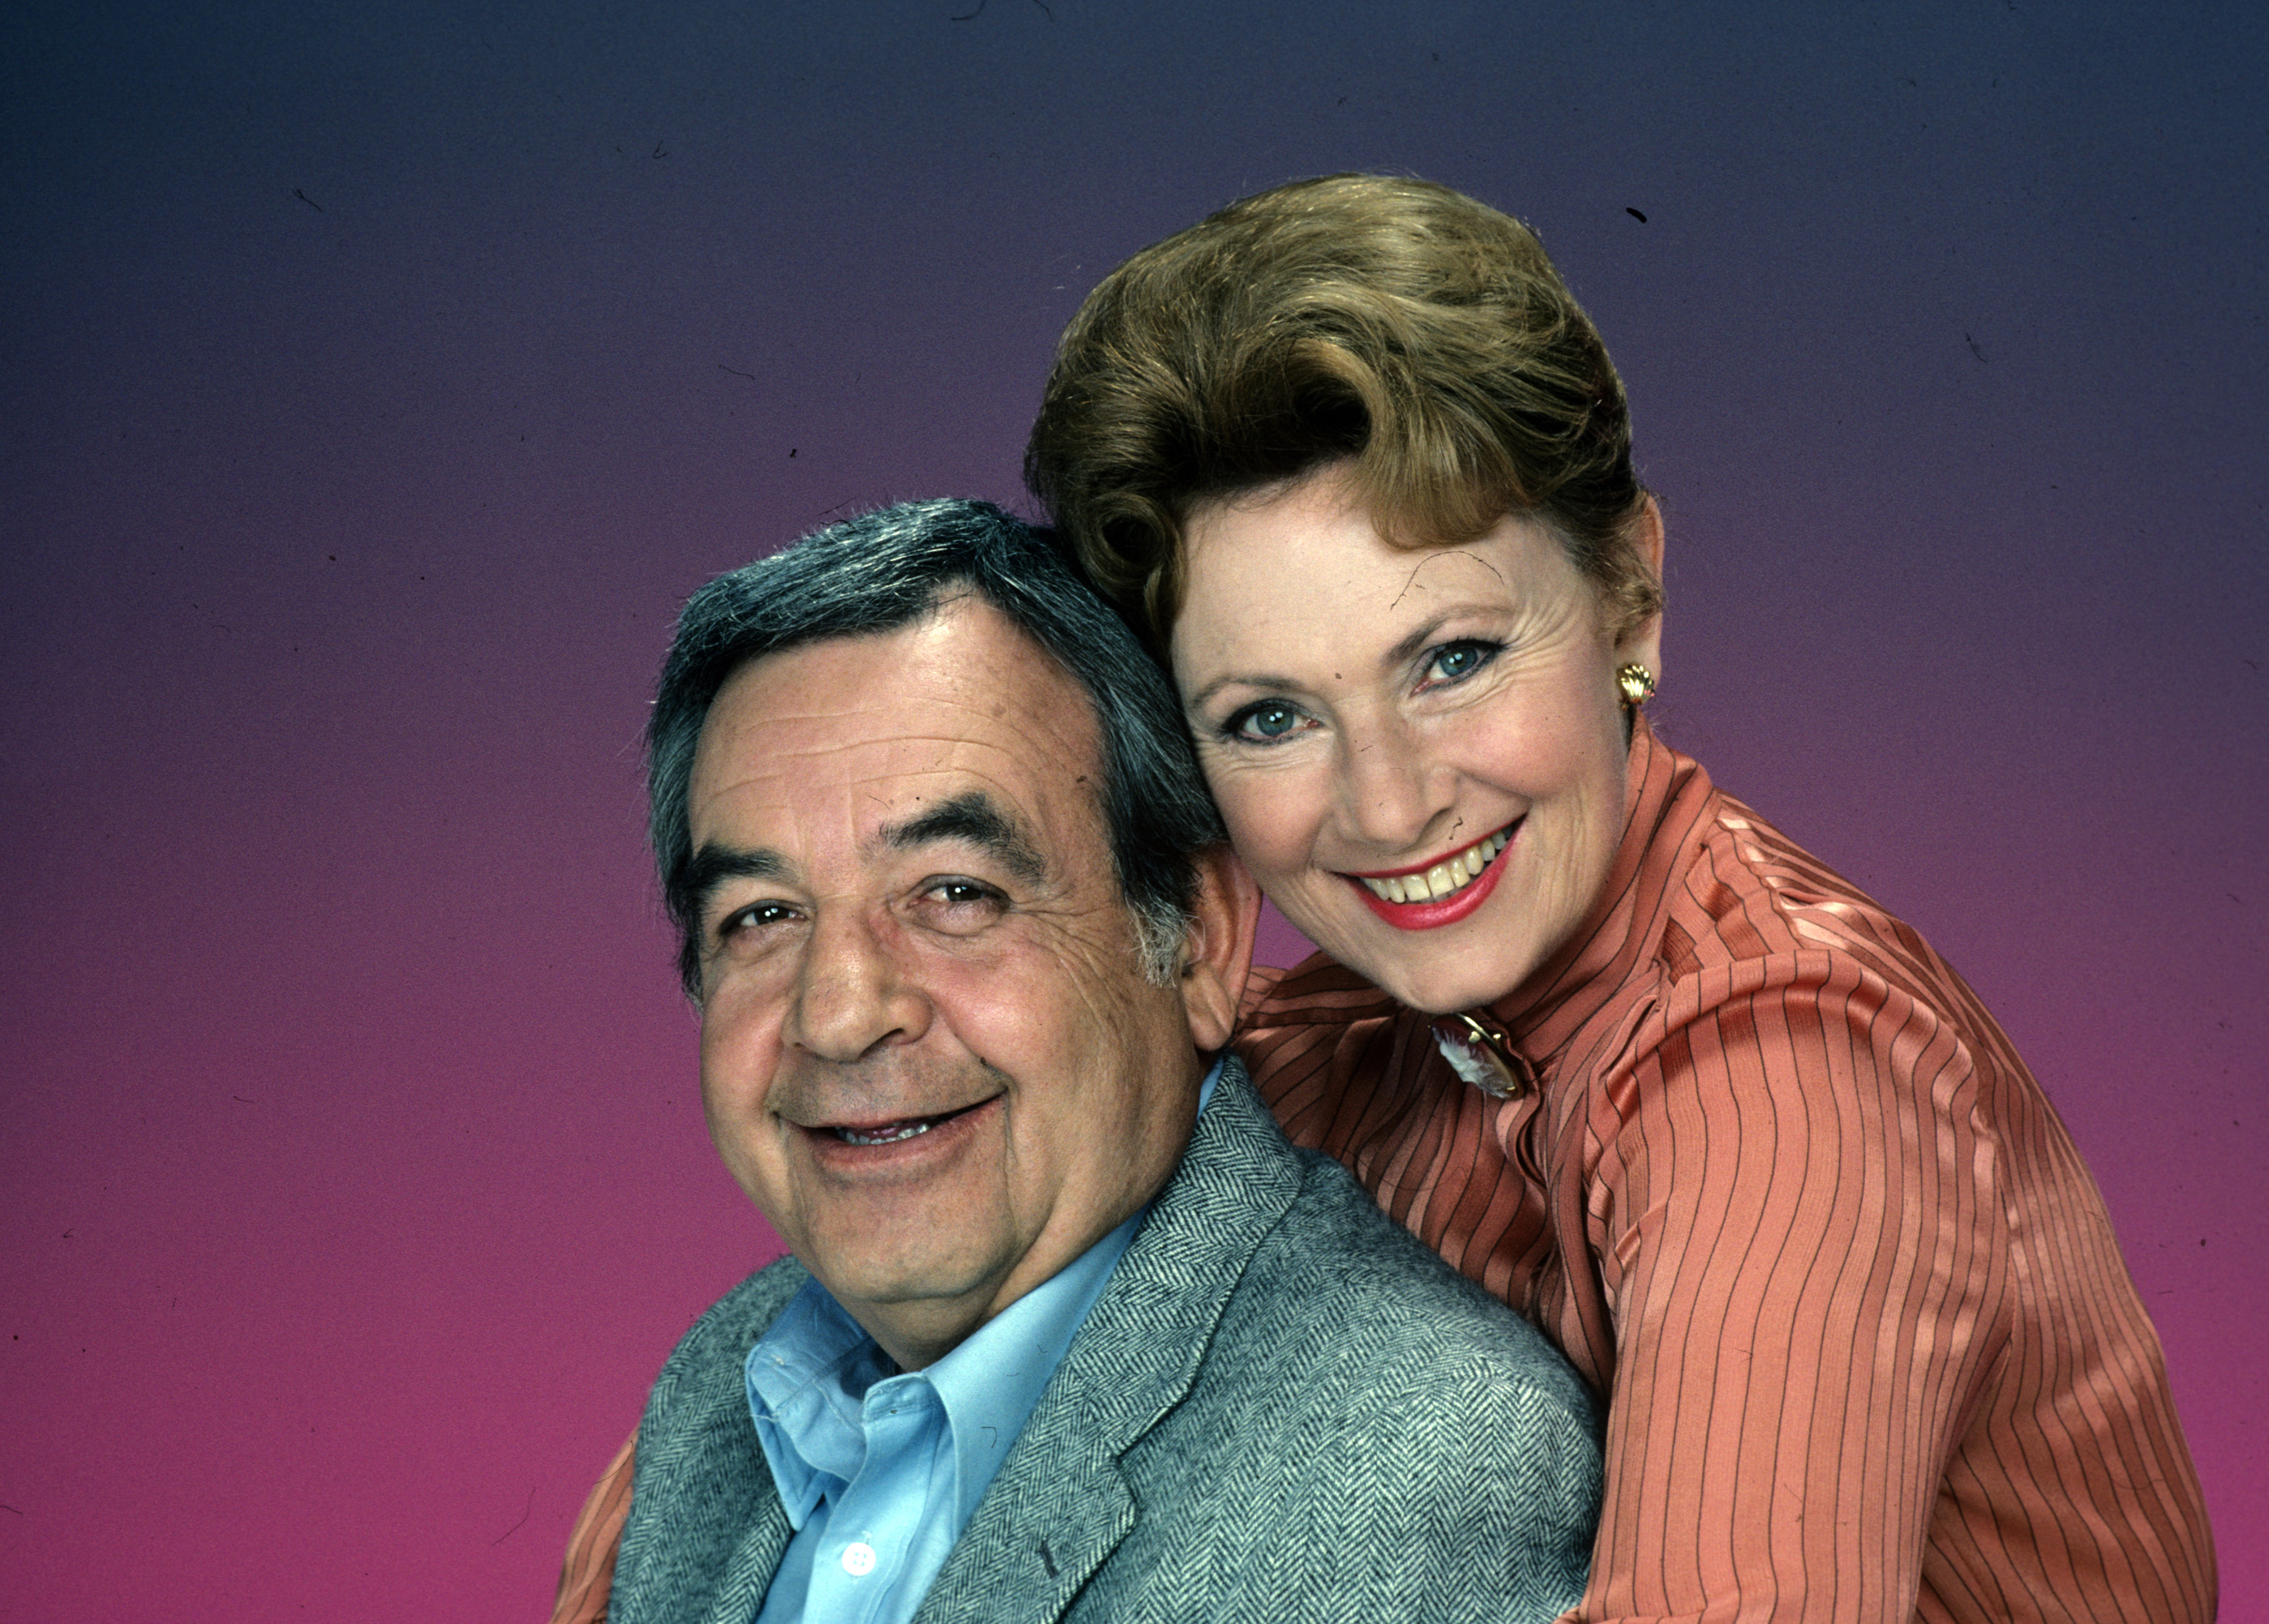 Tom Bosley and Marion Ross on "Happy Days" in 1982 | Source: Getty Images